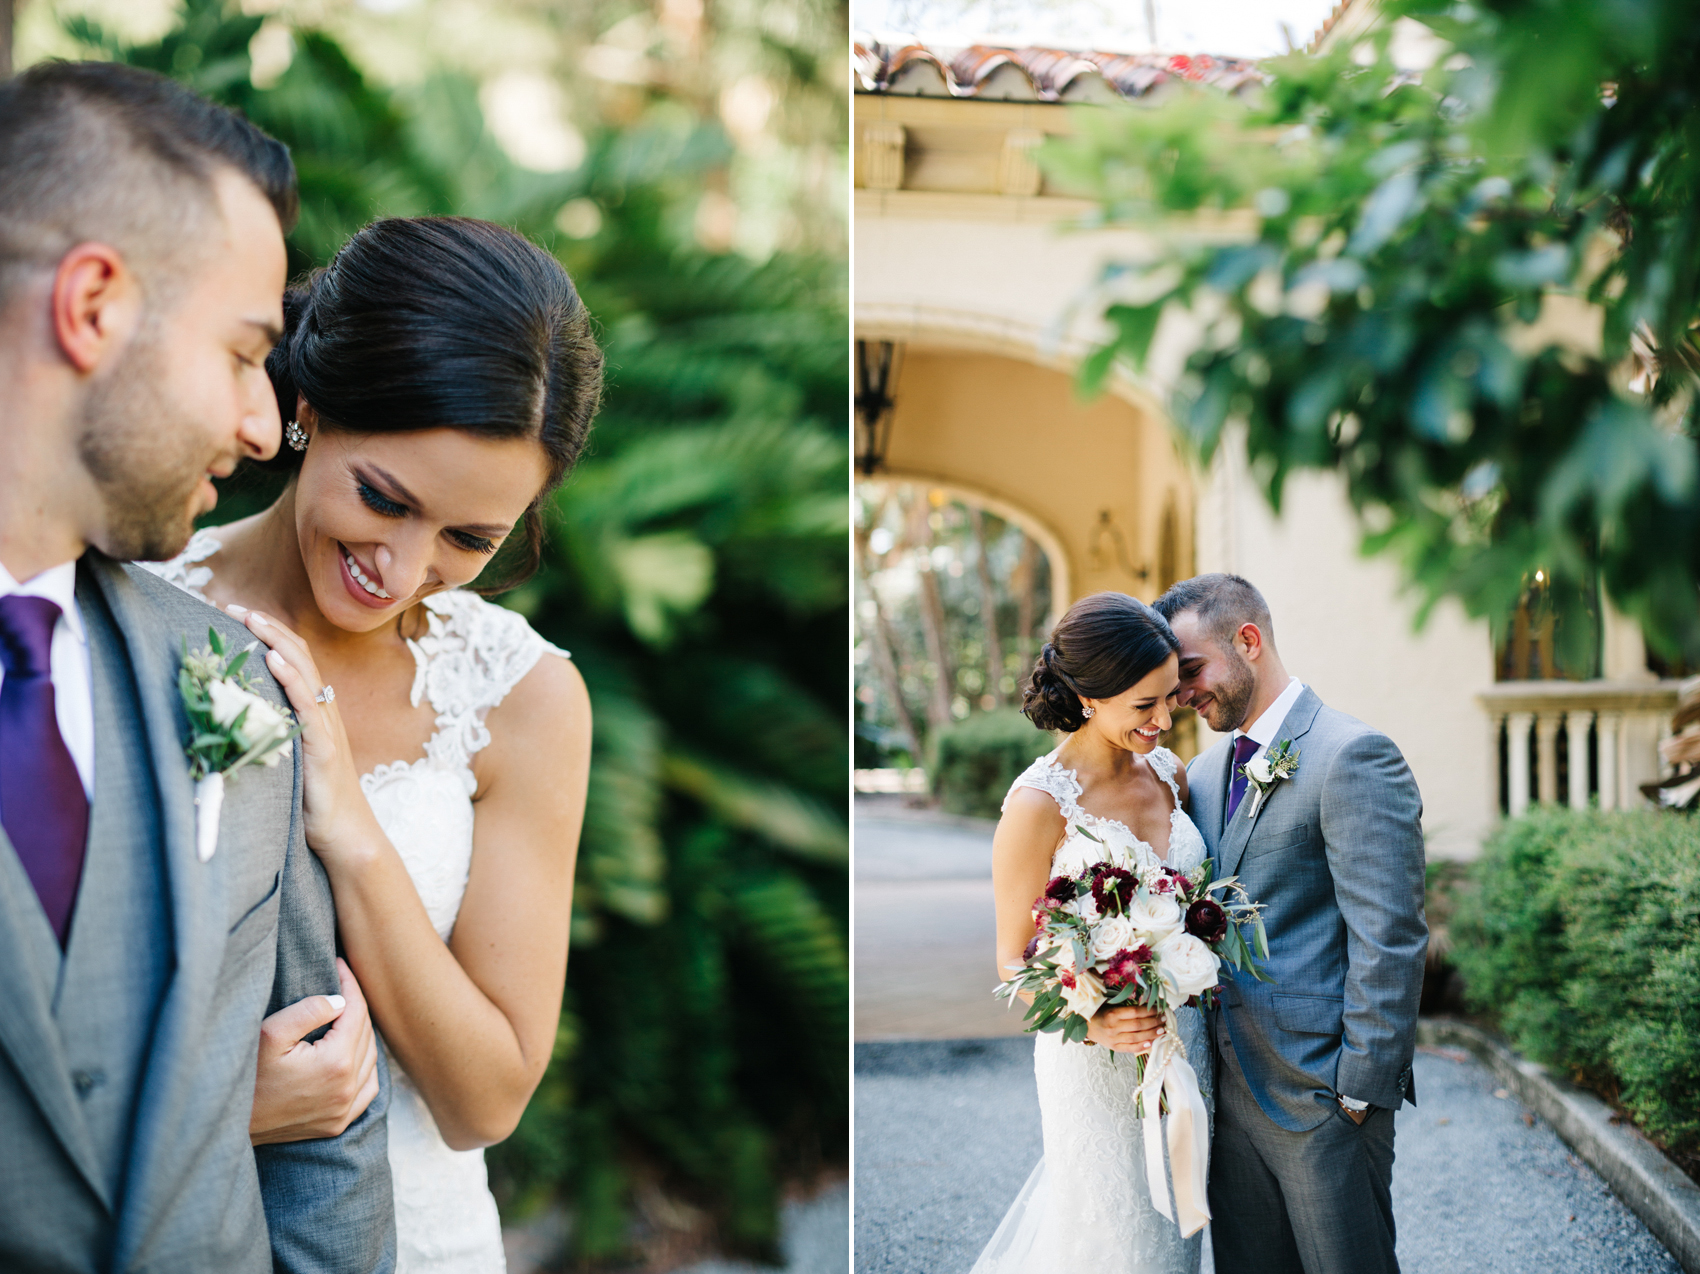 Modern wedding photography in Florida for a garden wedding at the historic Mansion